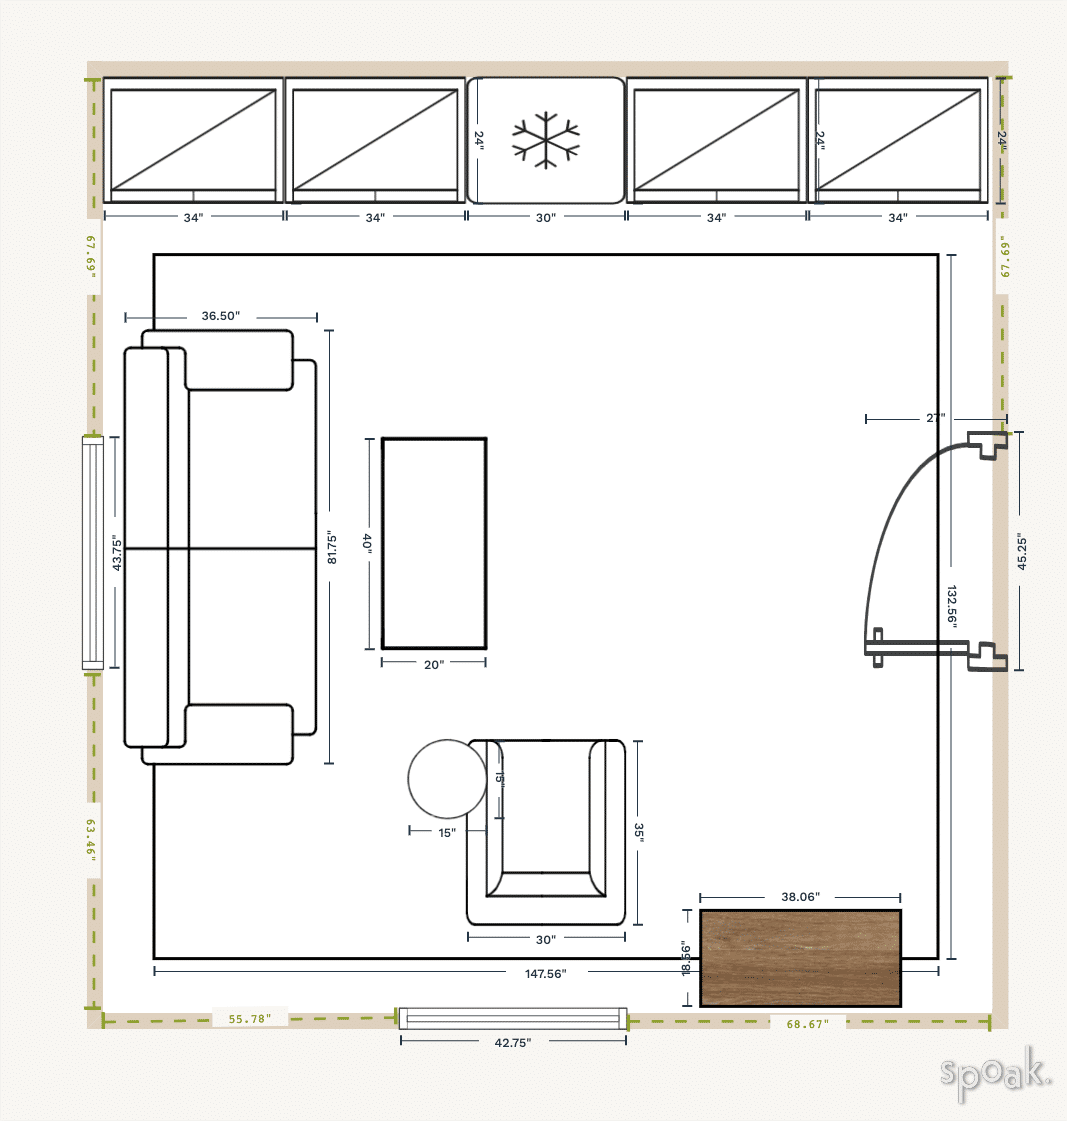 Kitchen Plan designed by Cate Naul